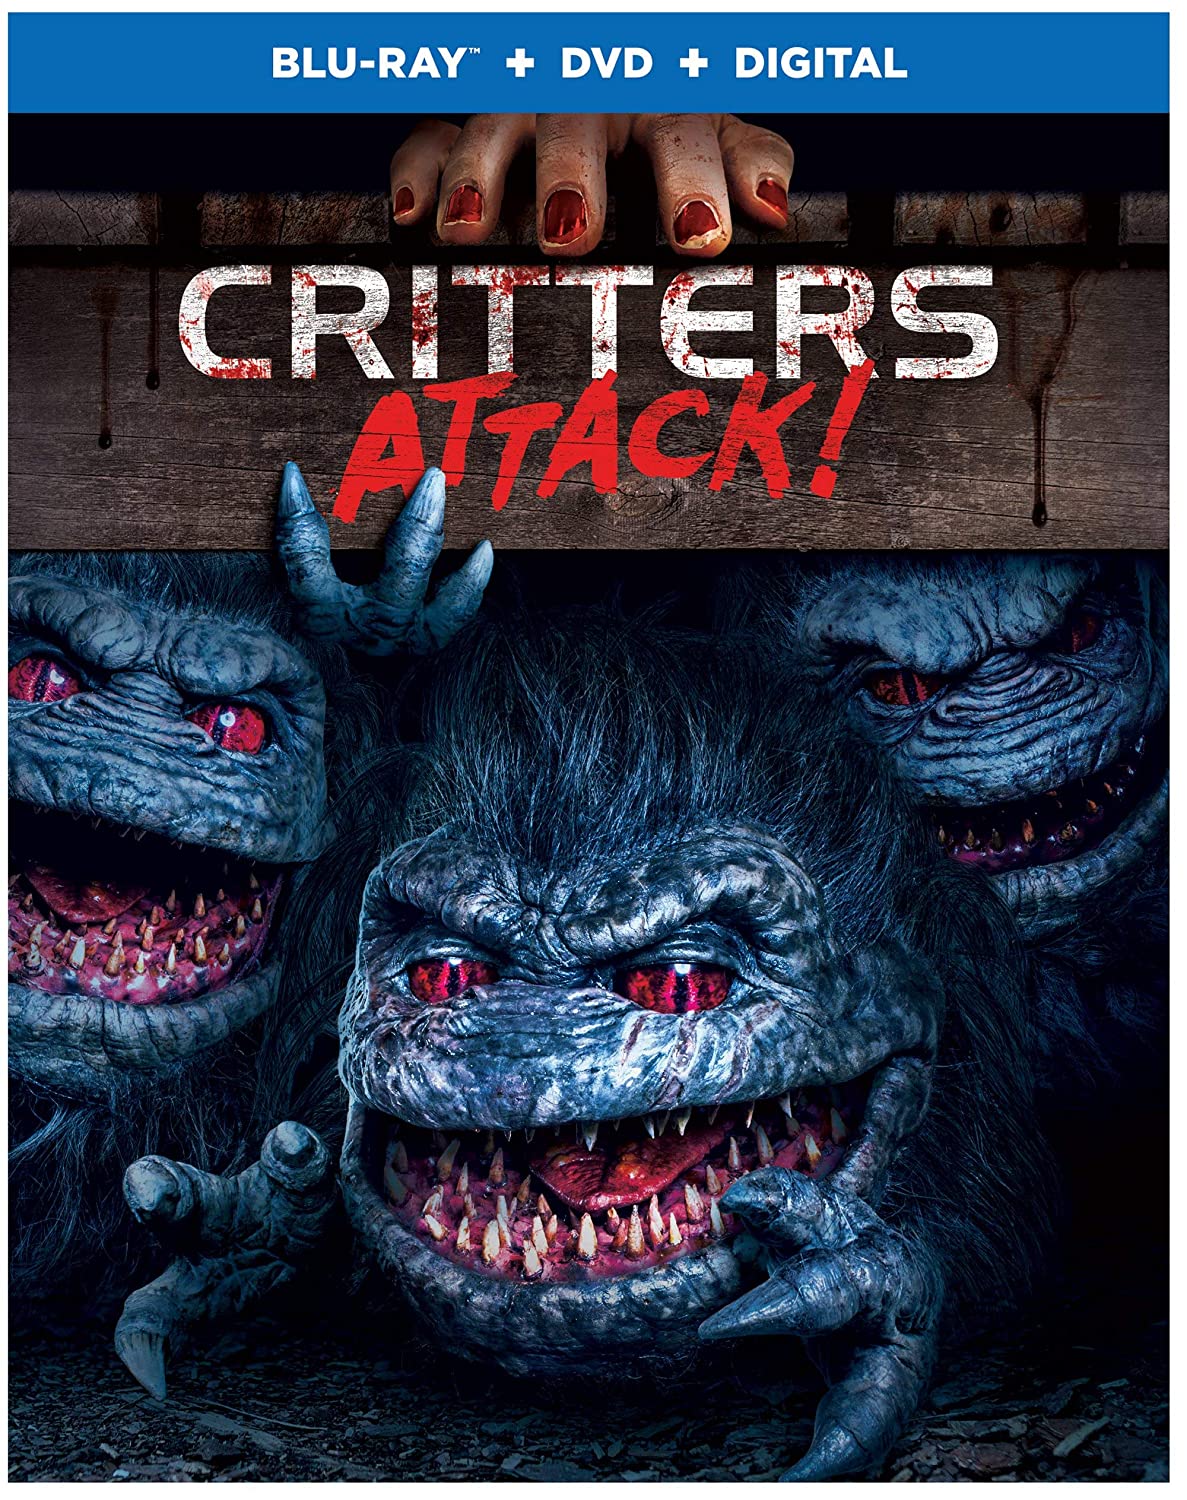 Critters Attack! Blu-ray + DVD (with Slipcover)